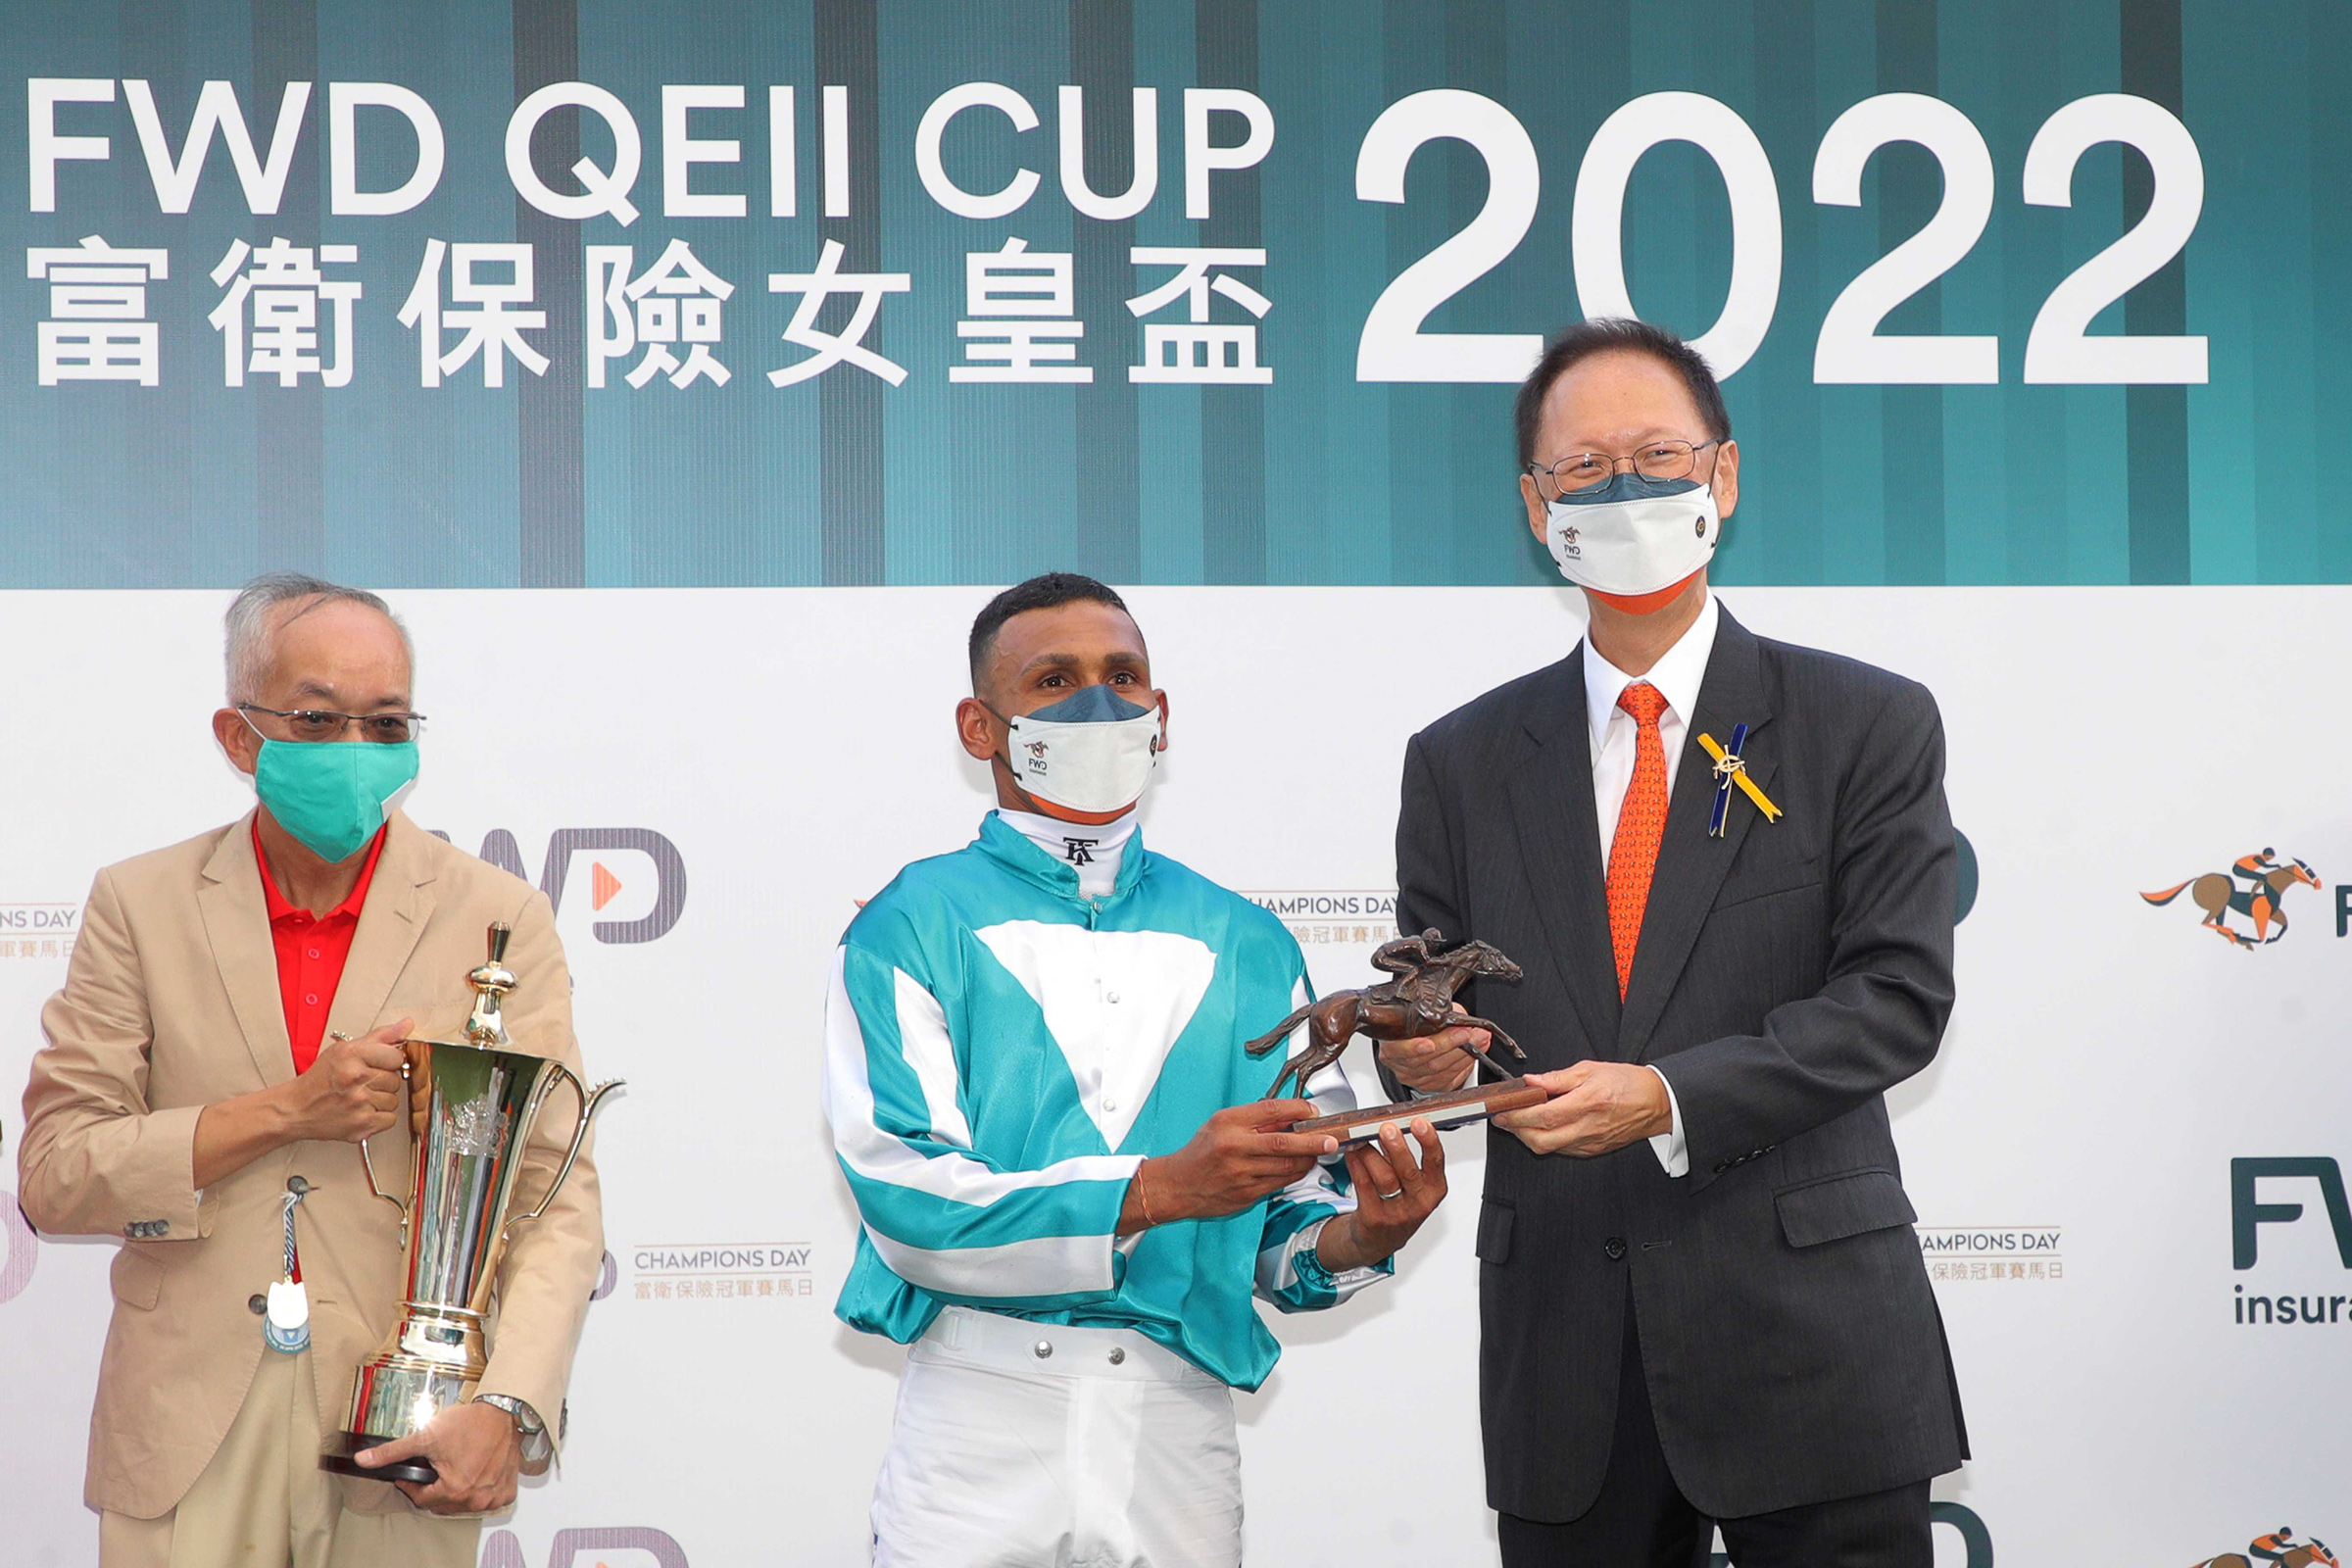 HKJC Chairman Philip Chen presents the trophy and bronze statuettes of a horse and jockey to Romantic Warrior’s owner Peter Lau Pak Fai and owner’s representative, trainer Danny Shum and jockey Karis Teetan.